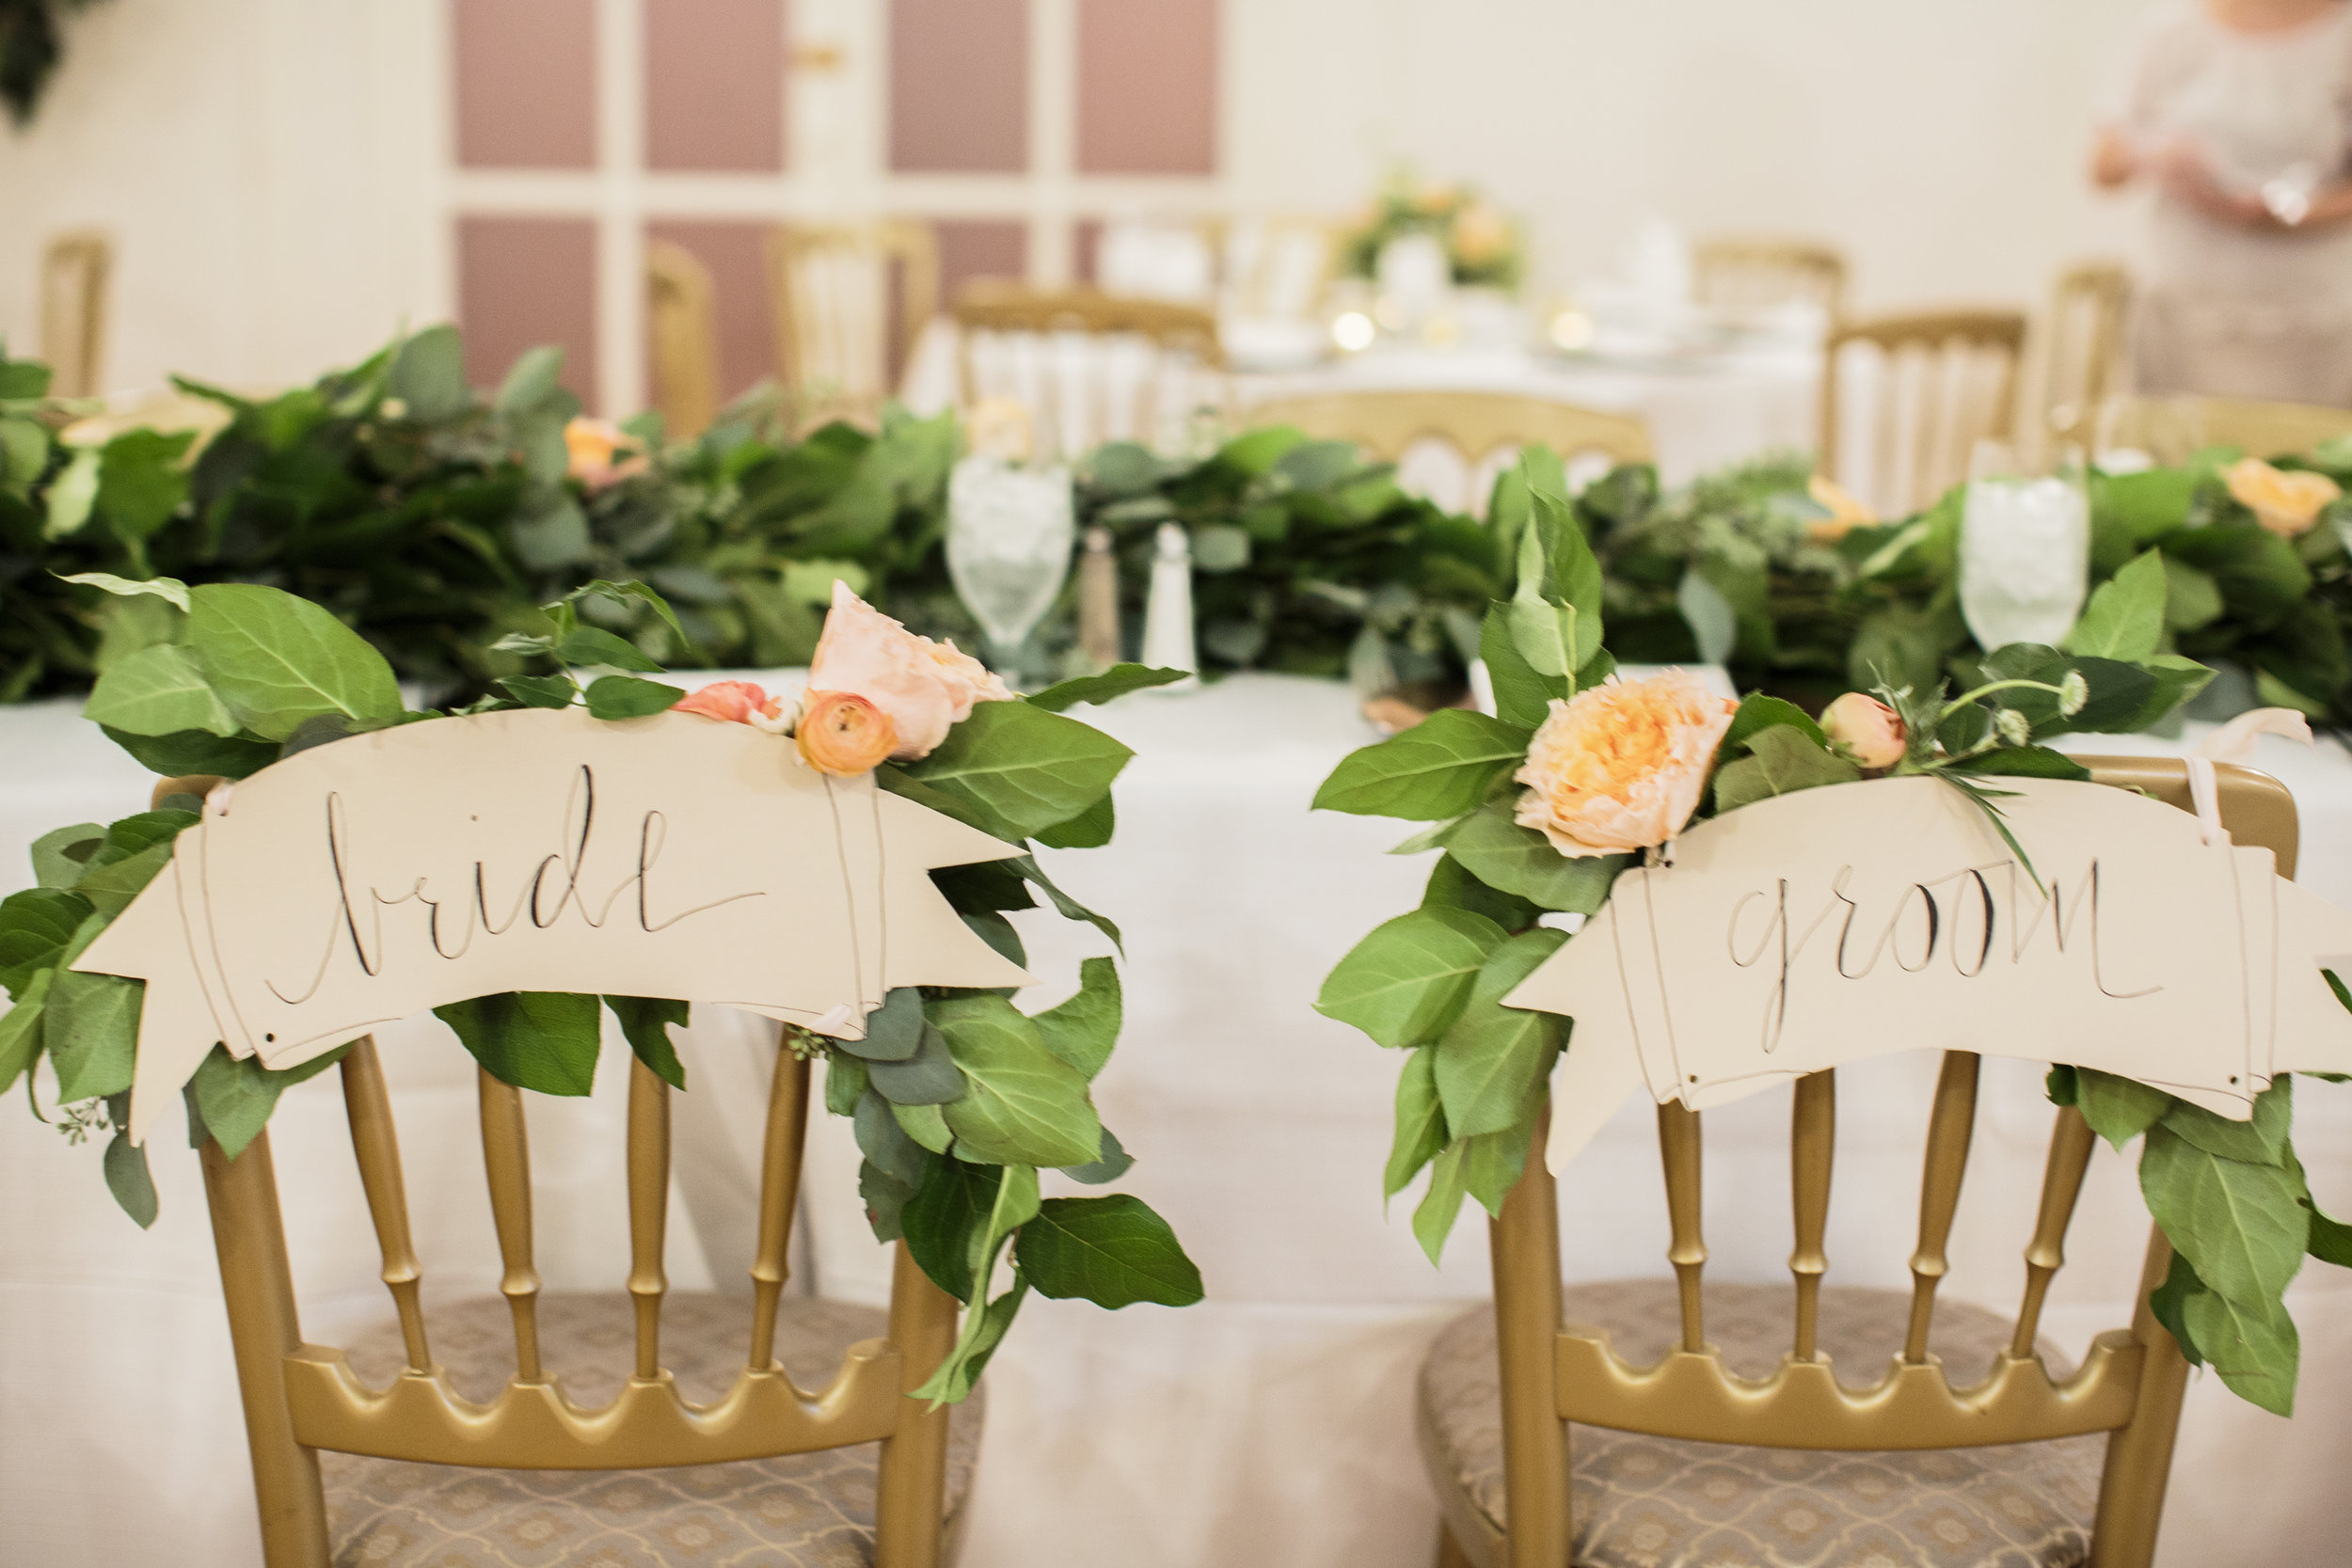 Bride and Groom Chair Banners | Simply Charming Socials | Atlanta Wedding Planner